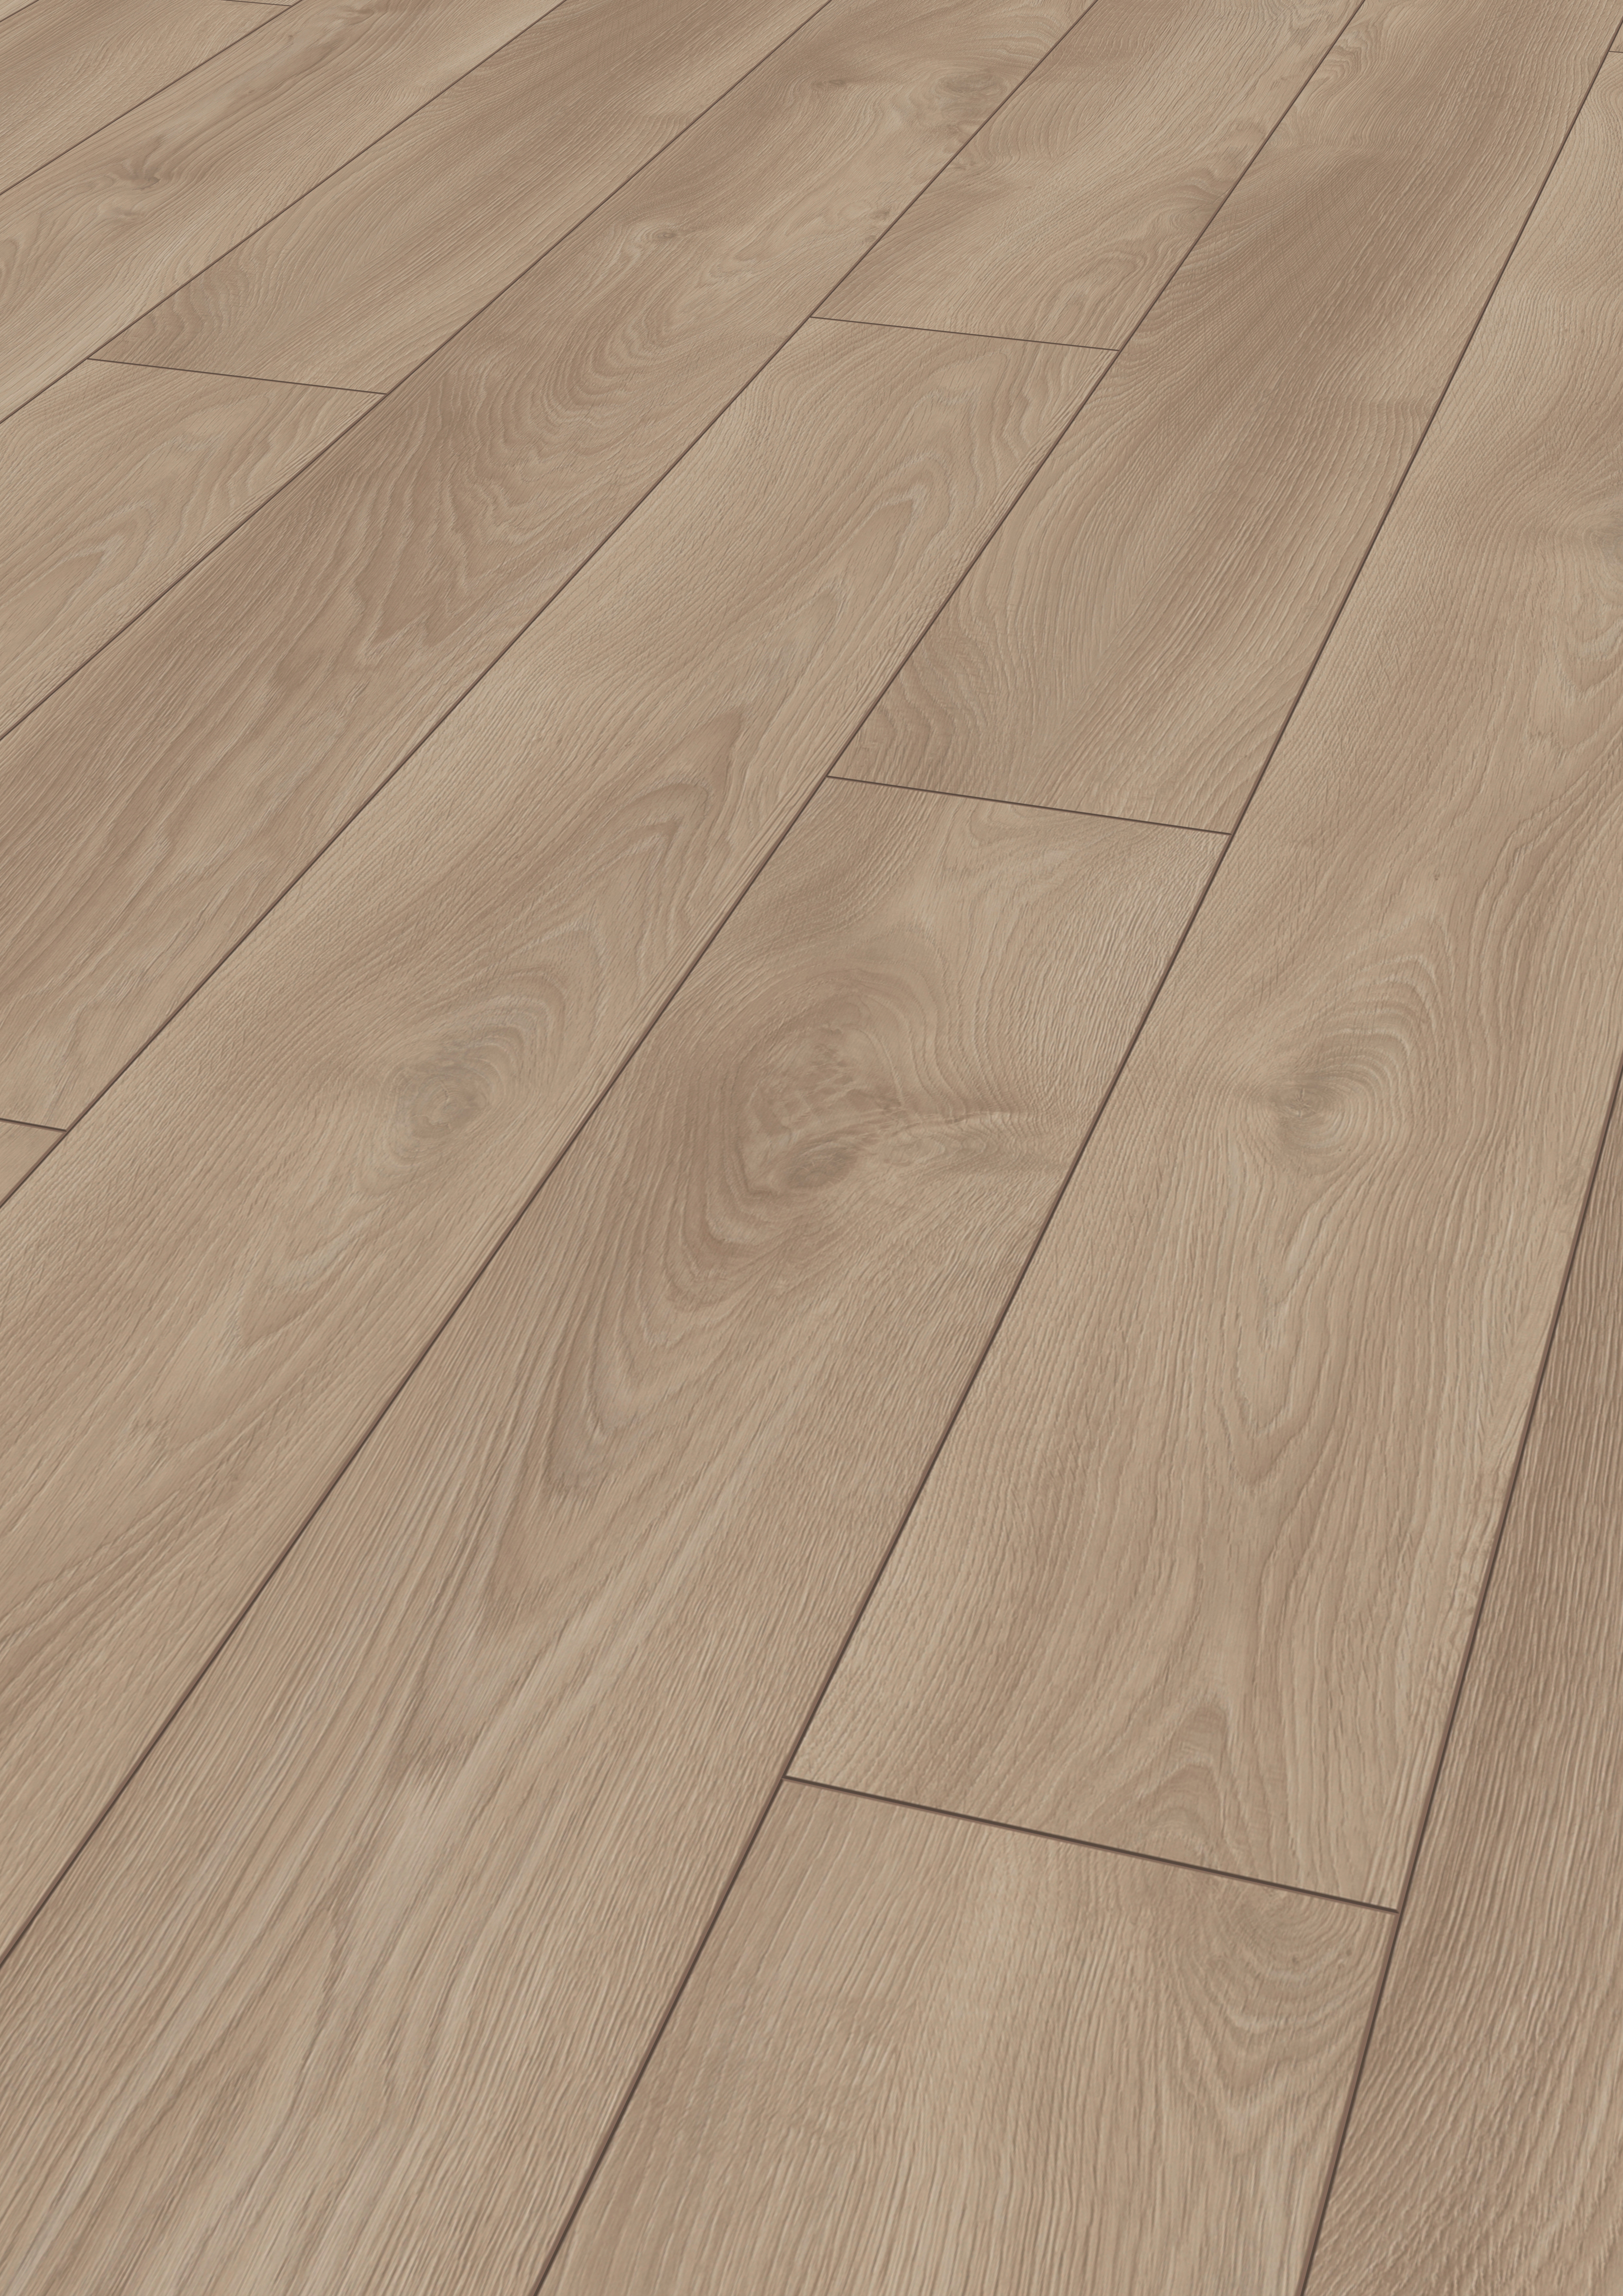 ottawa valley hardwood flooring of mammut laminate flooring in country house plank style kronotex with download picture amp